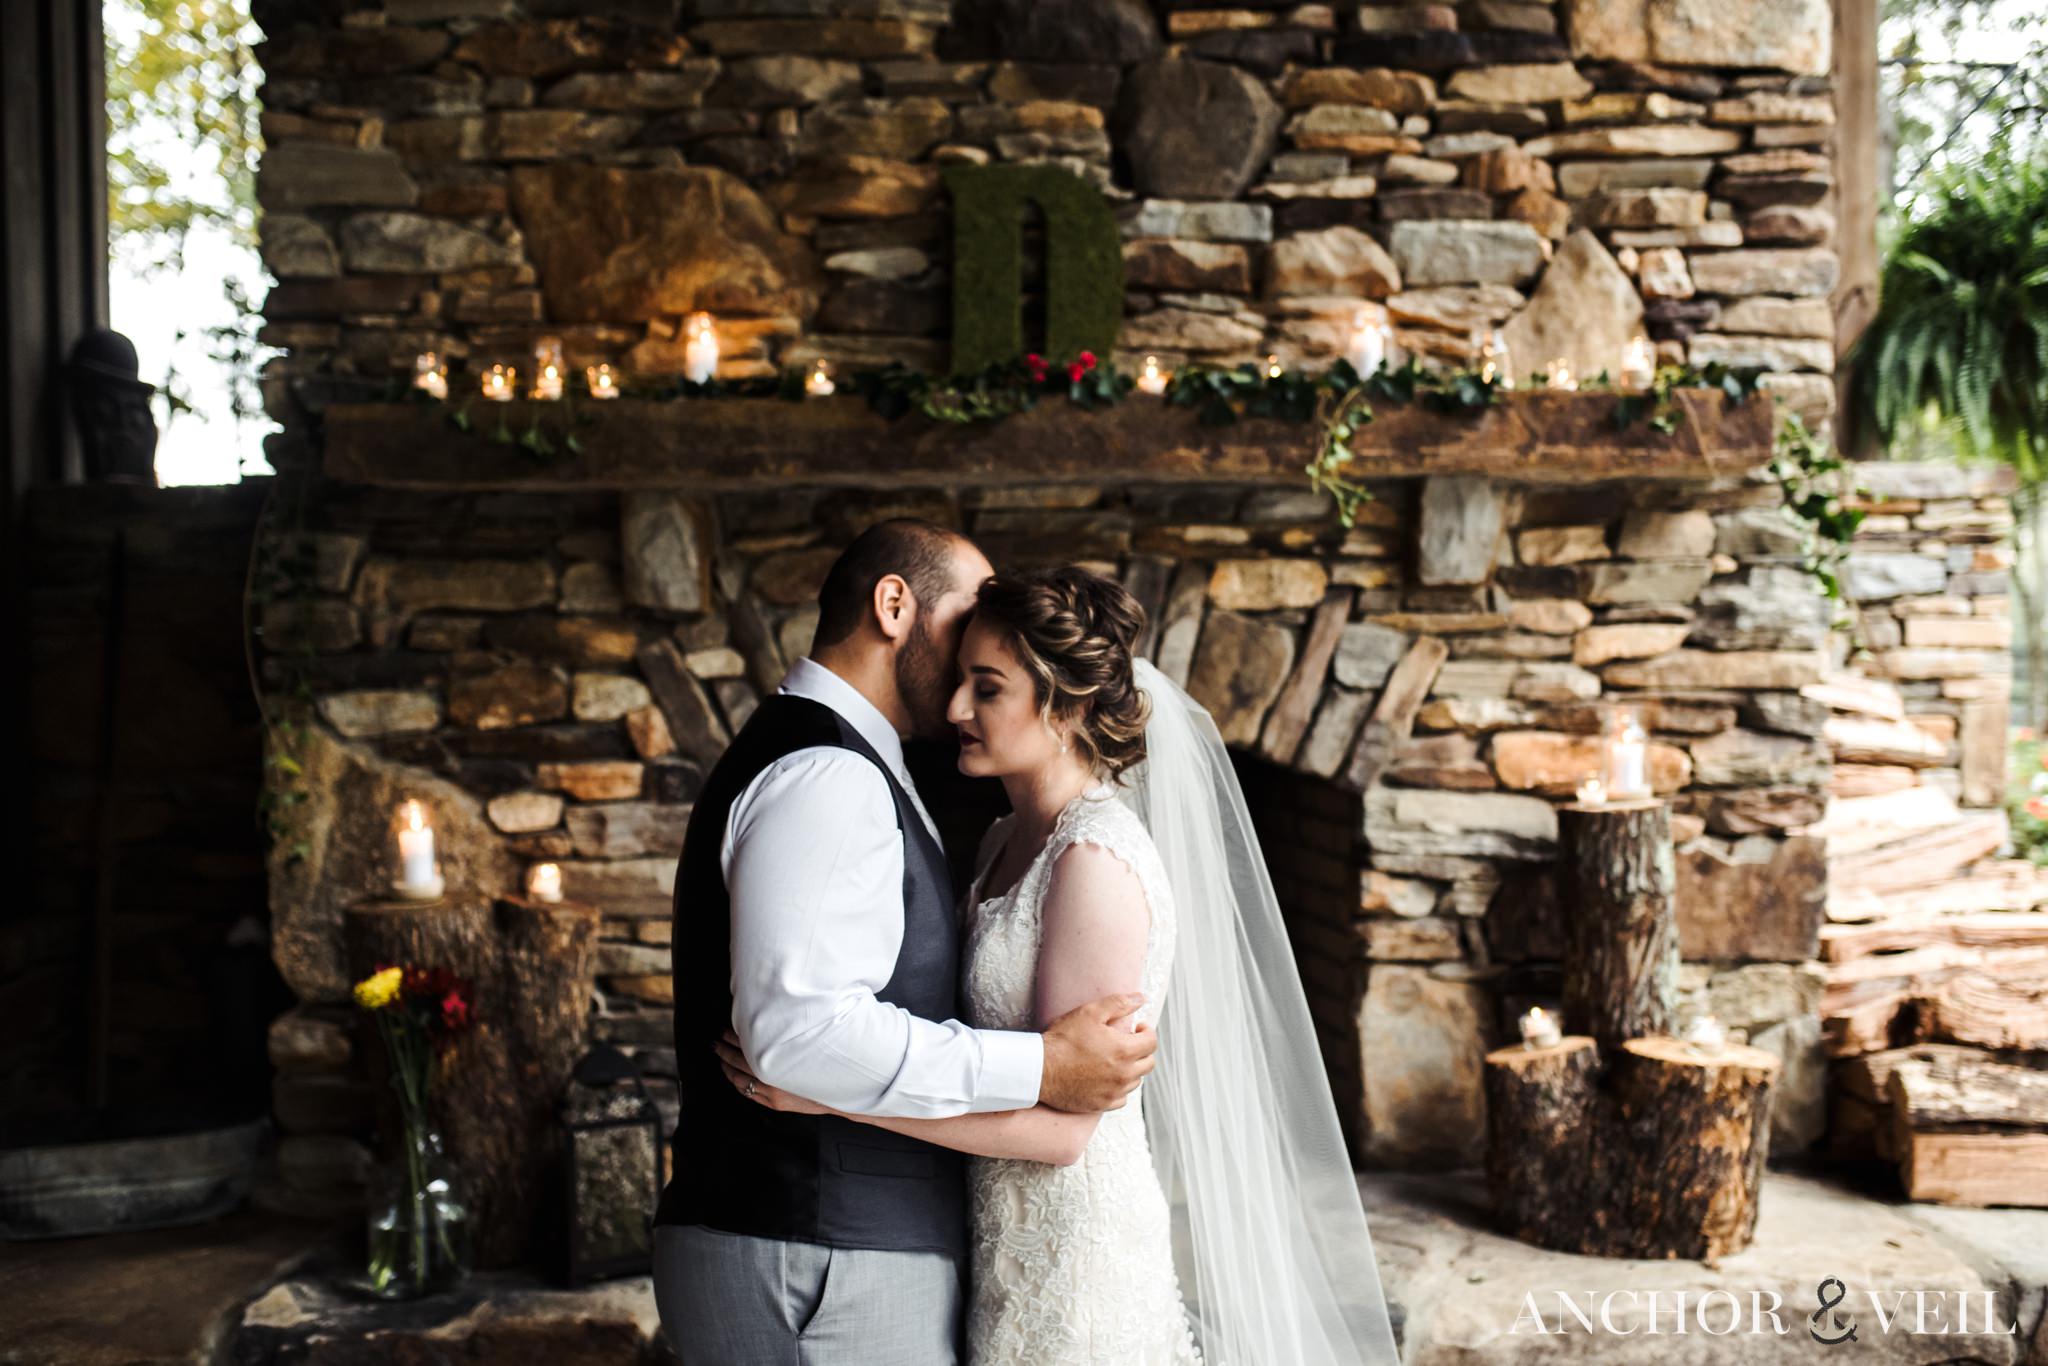 near the stone fireplace at the Hunting Creek Farms Wedding